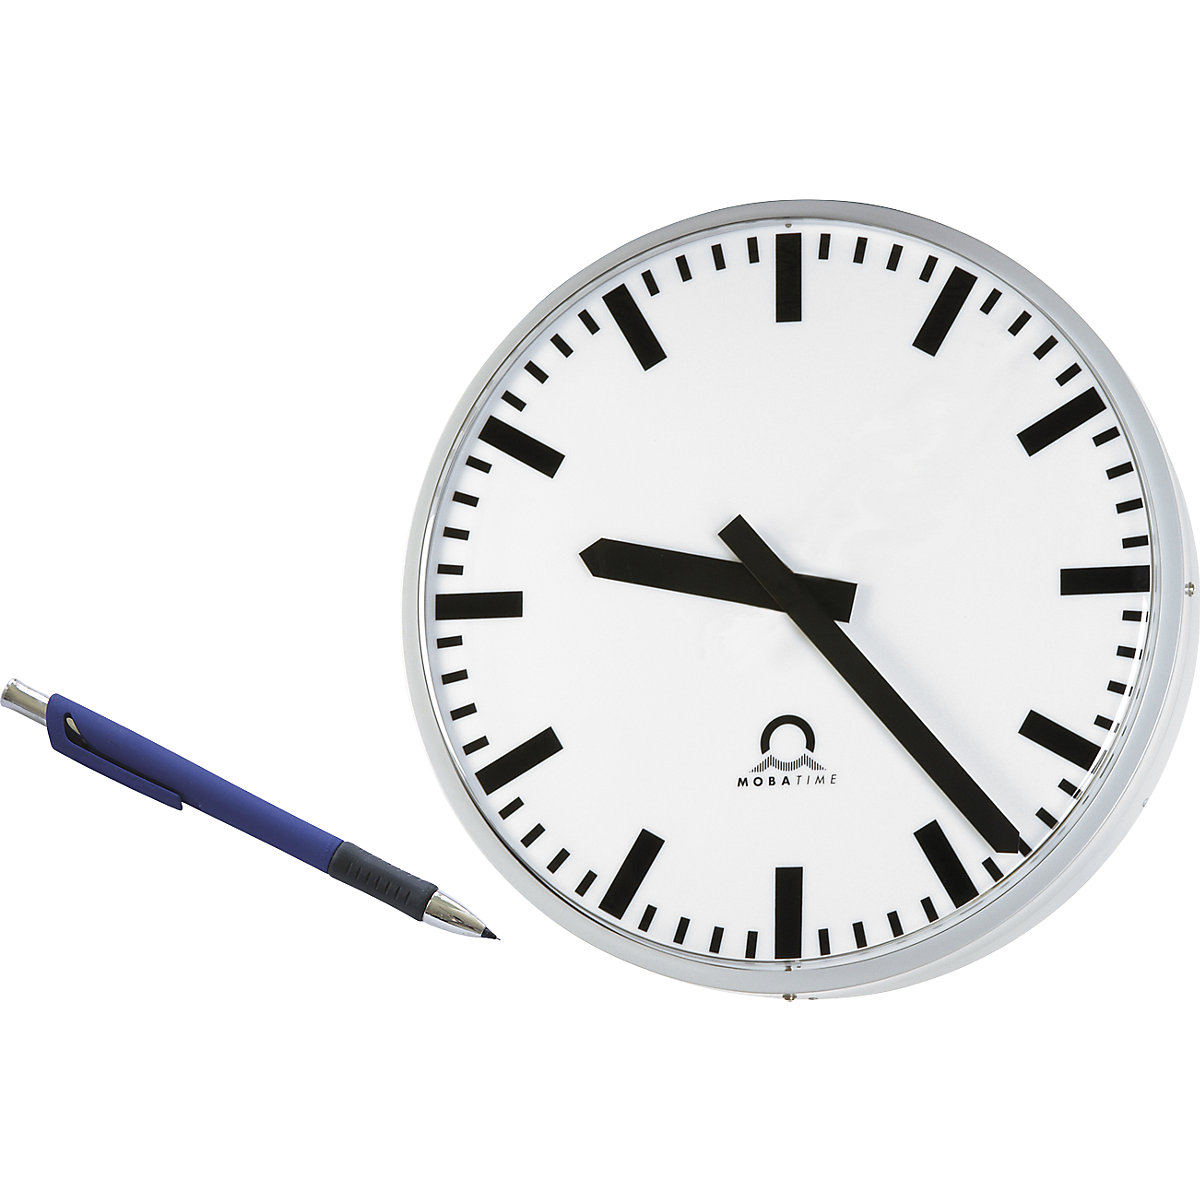 Extra cost of clock face drawing